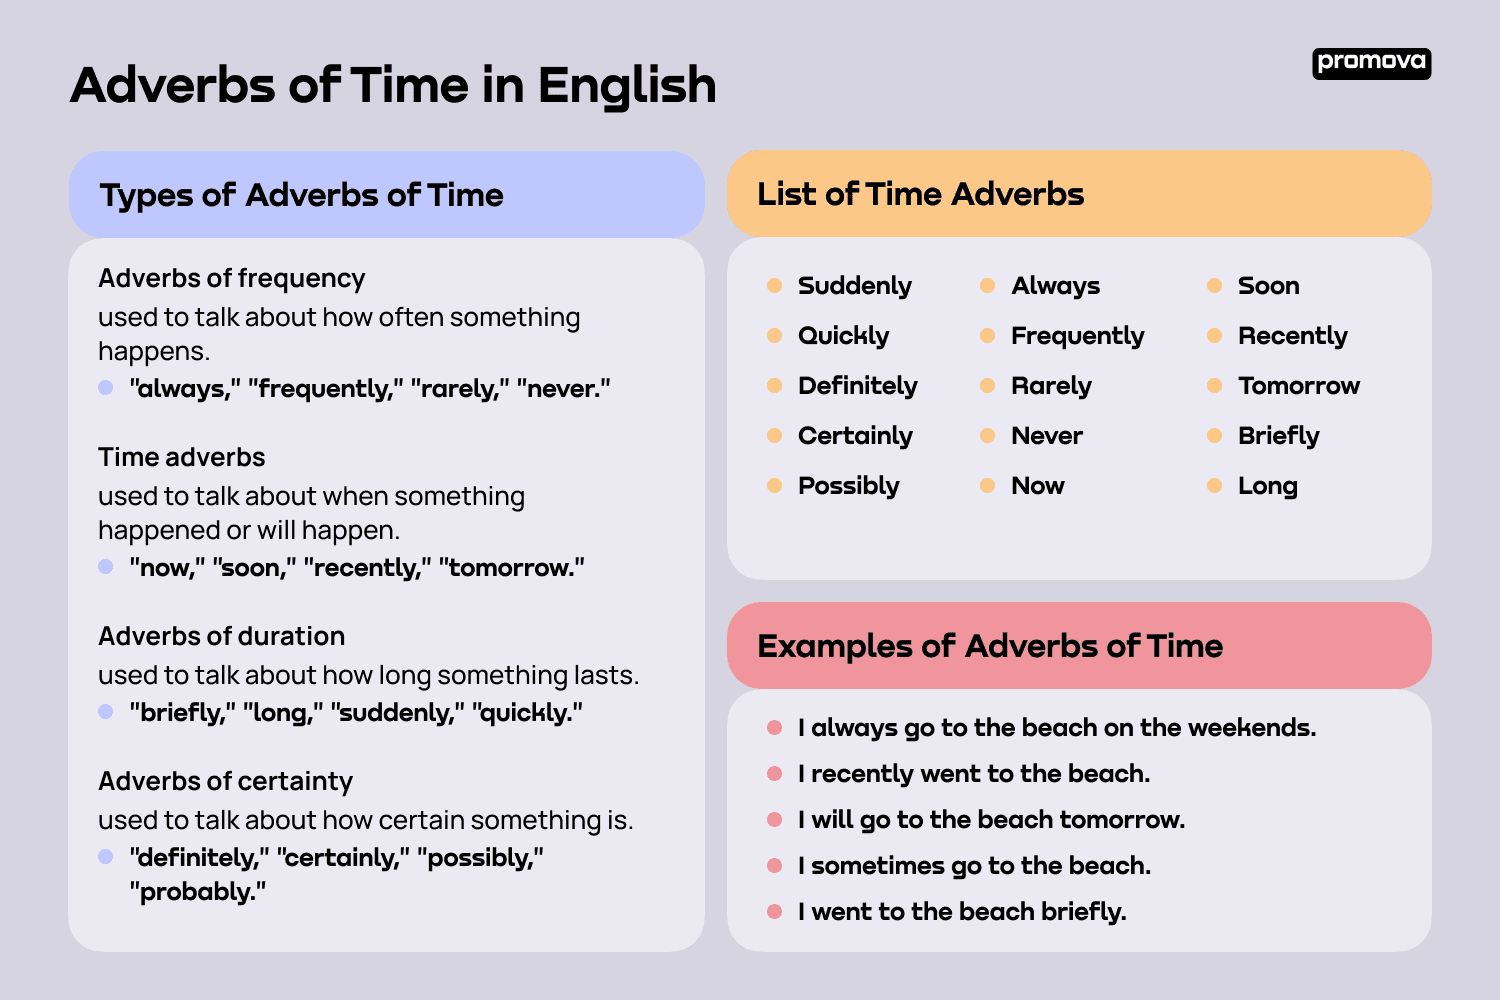 Adverbs of Time in English